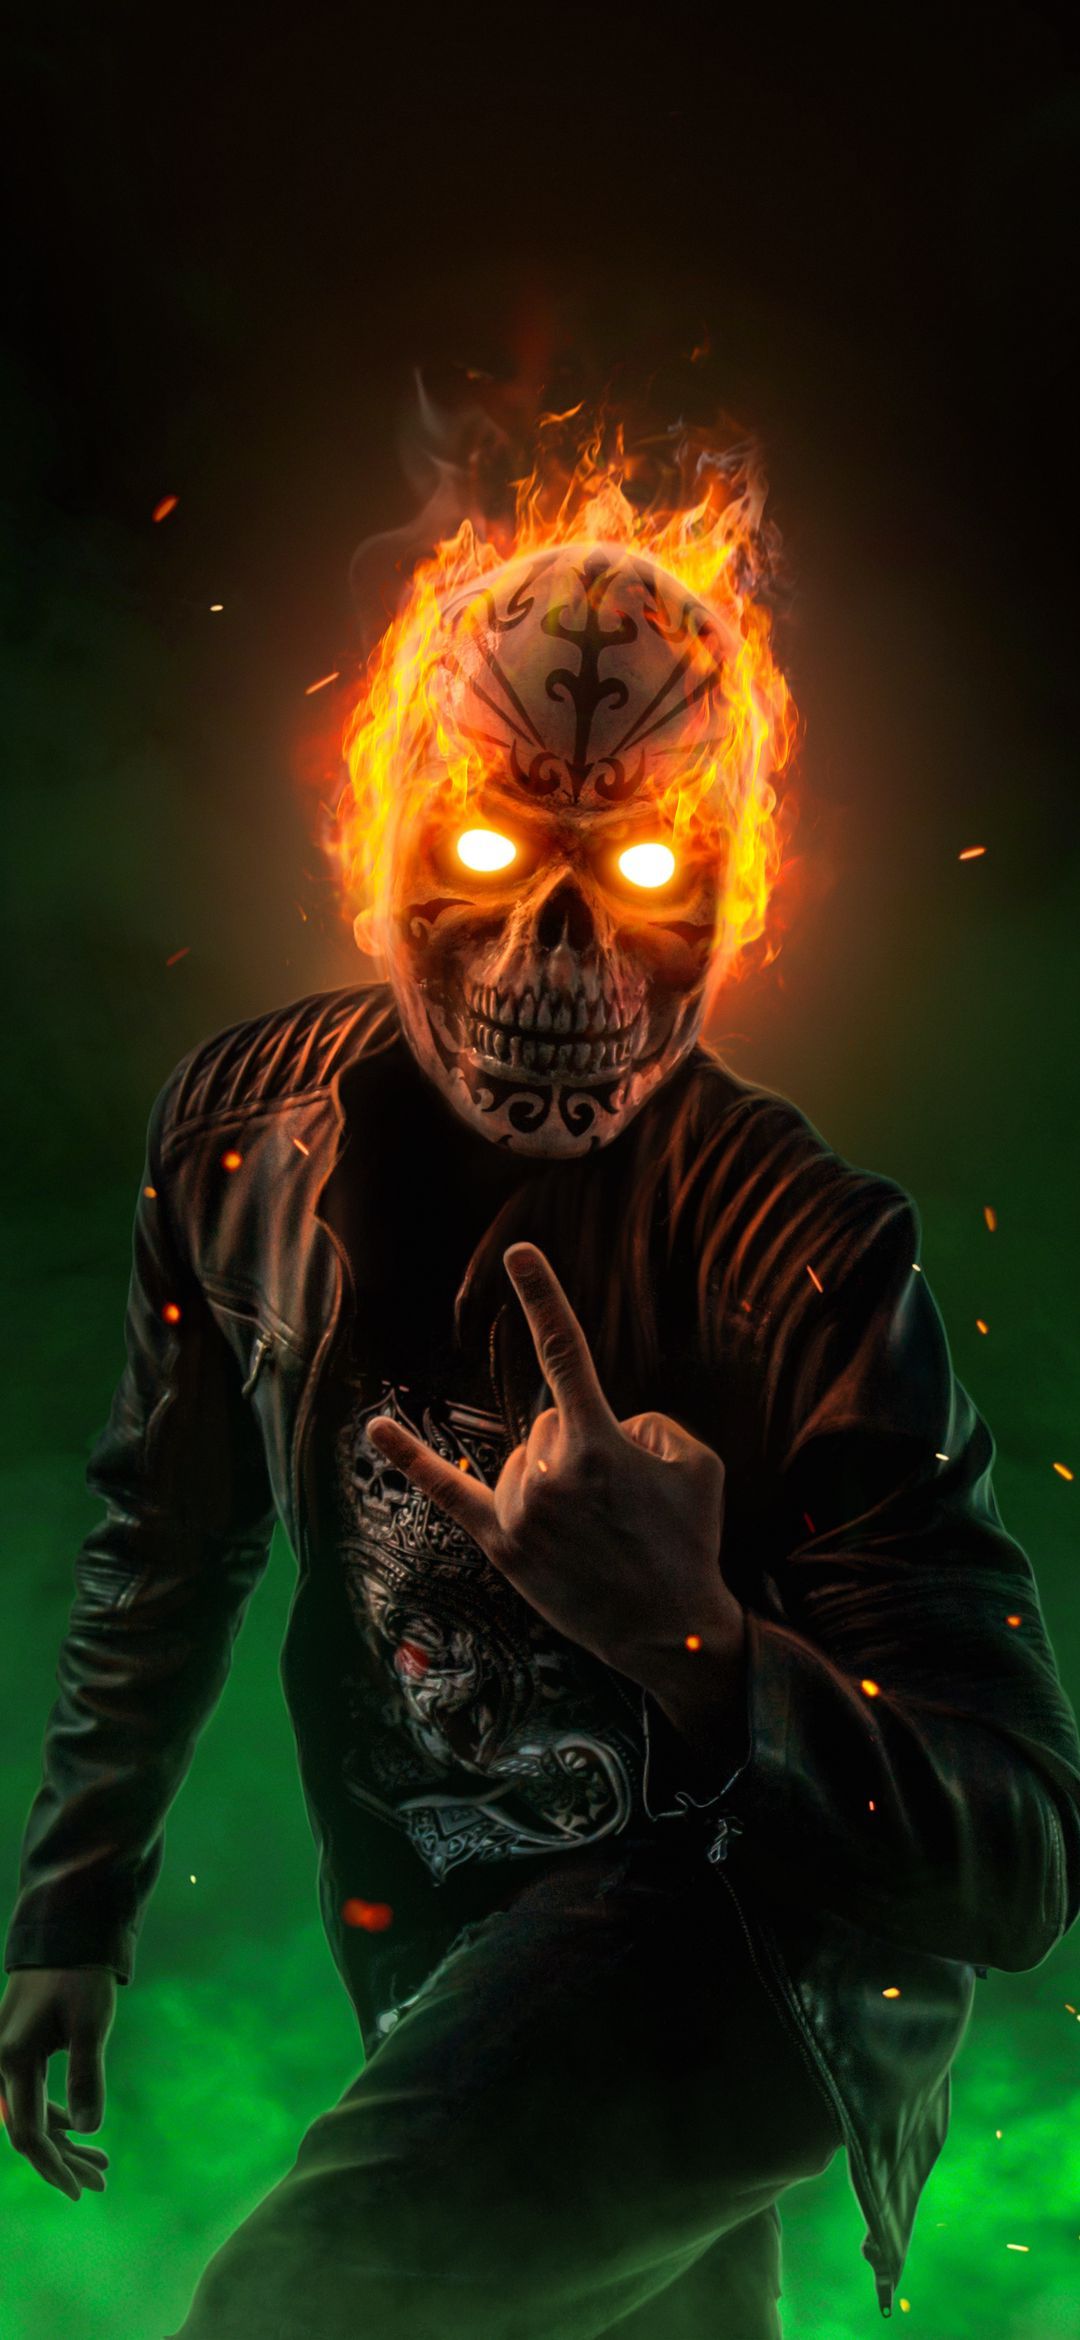 Ghost-rider - Wallpaper Cave